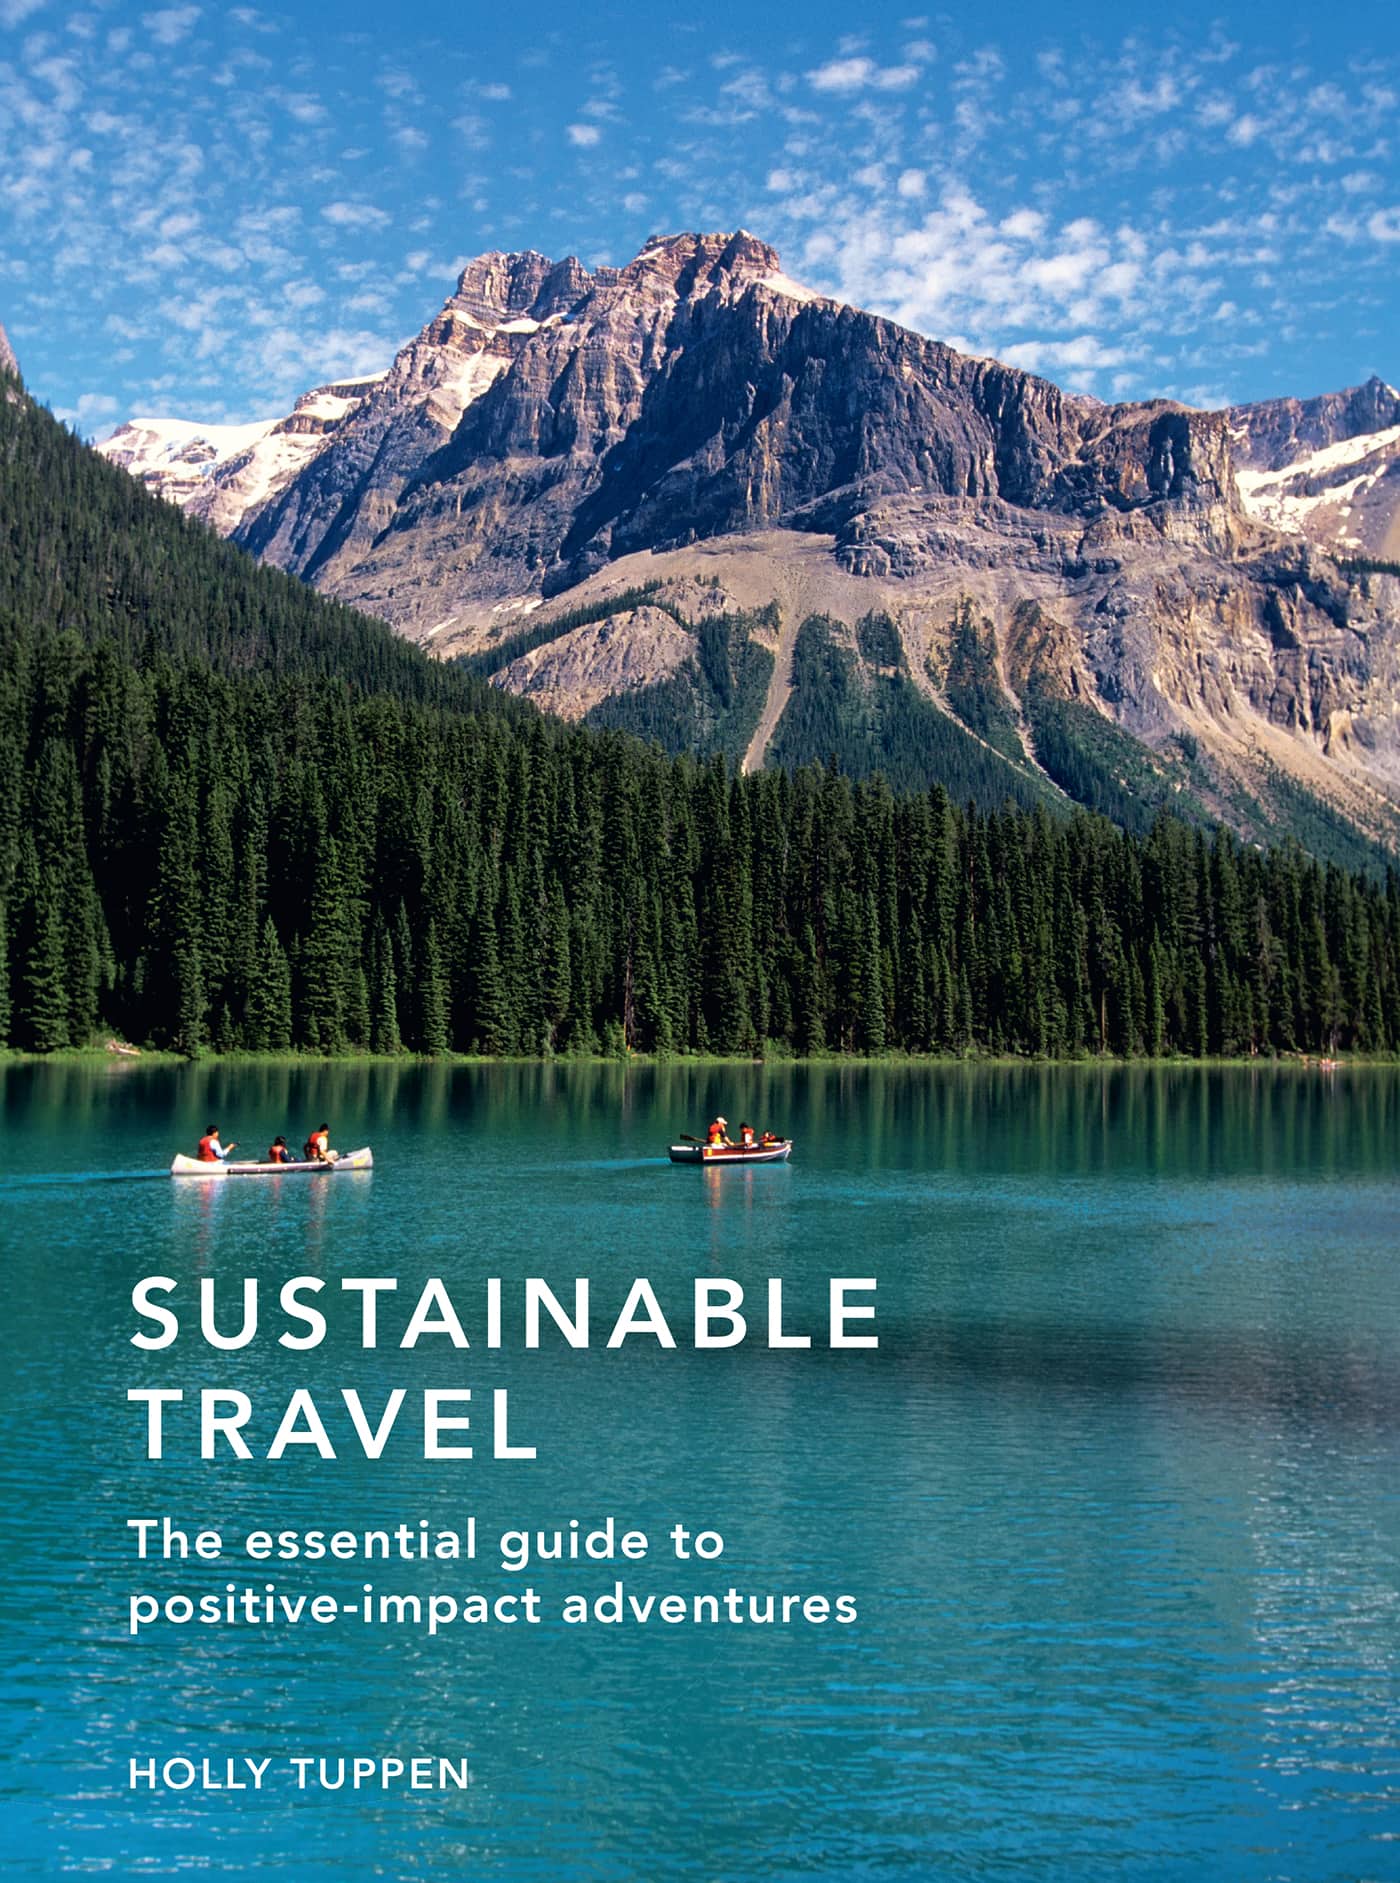 SUSTAINABLE TRAVEL The essential guide to positive-impact adventures - photo 1